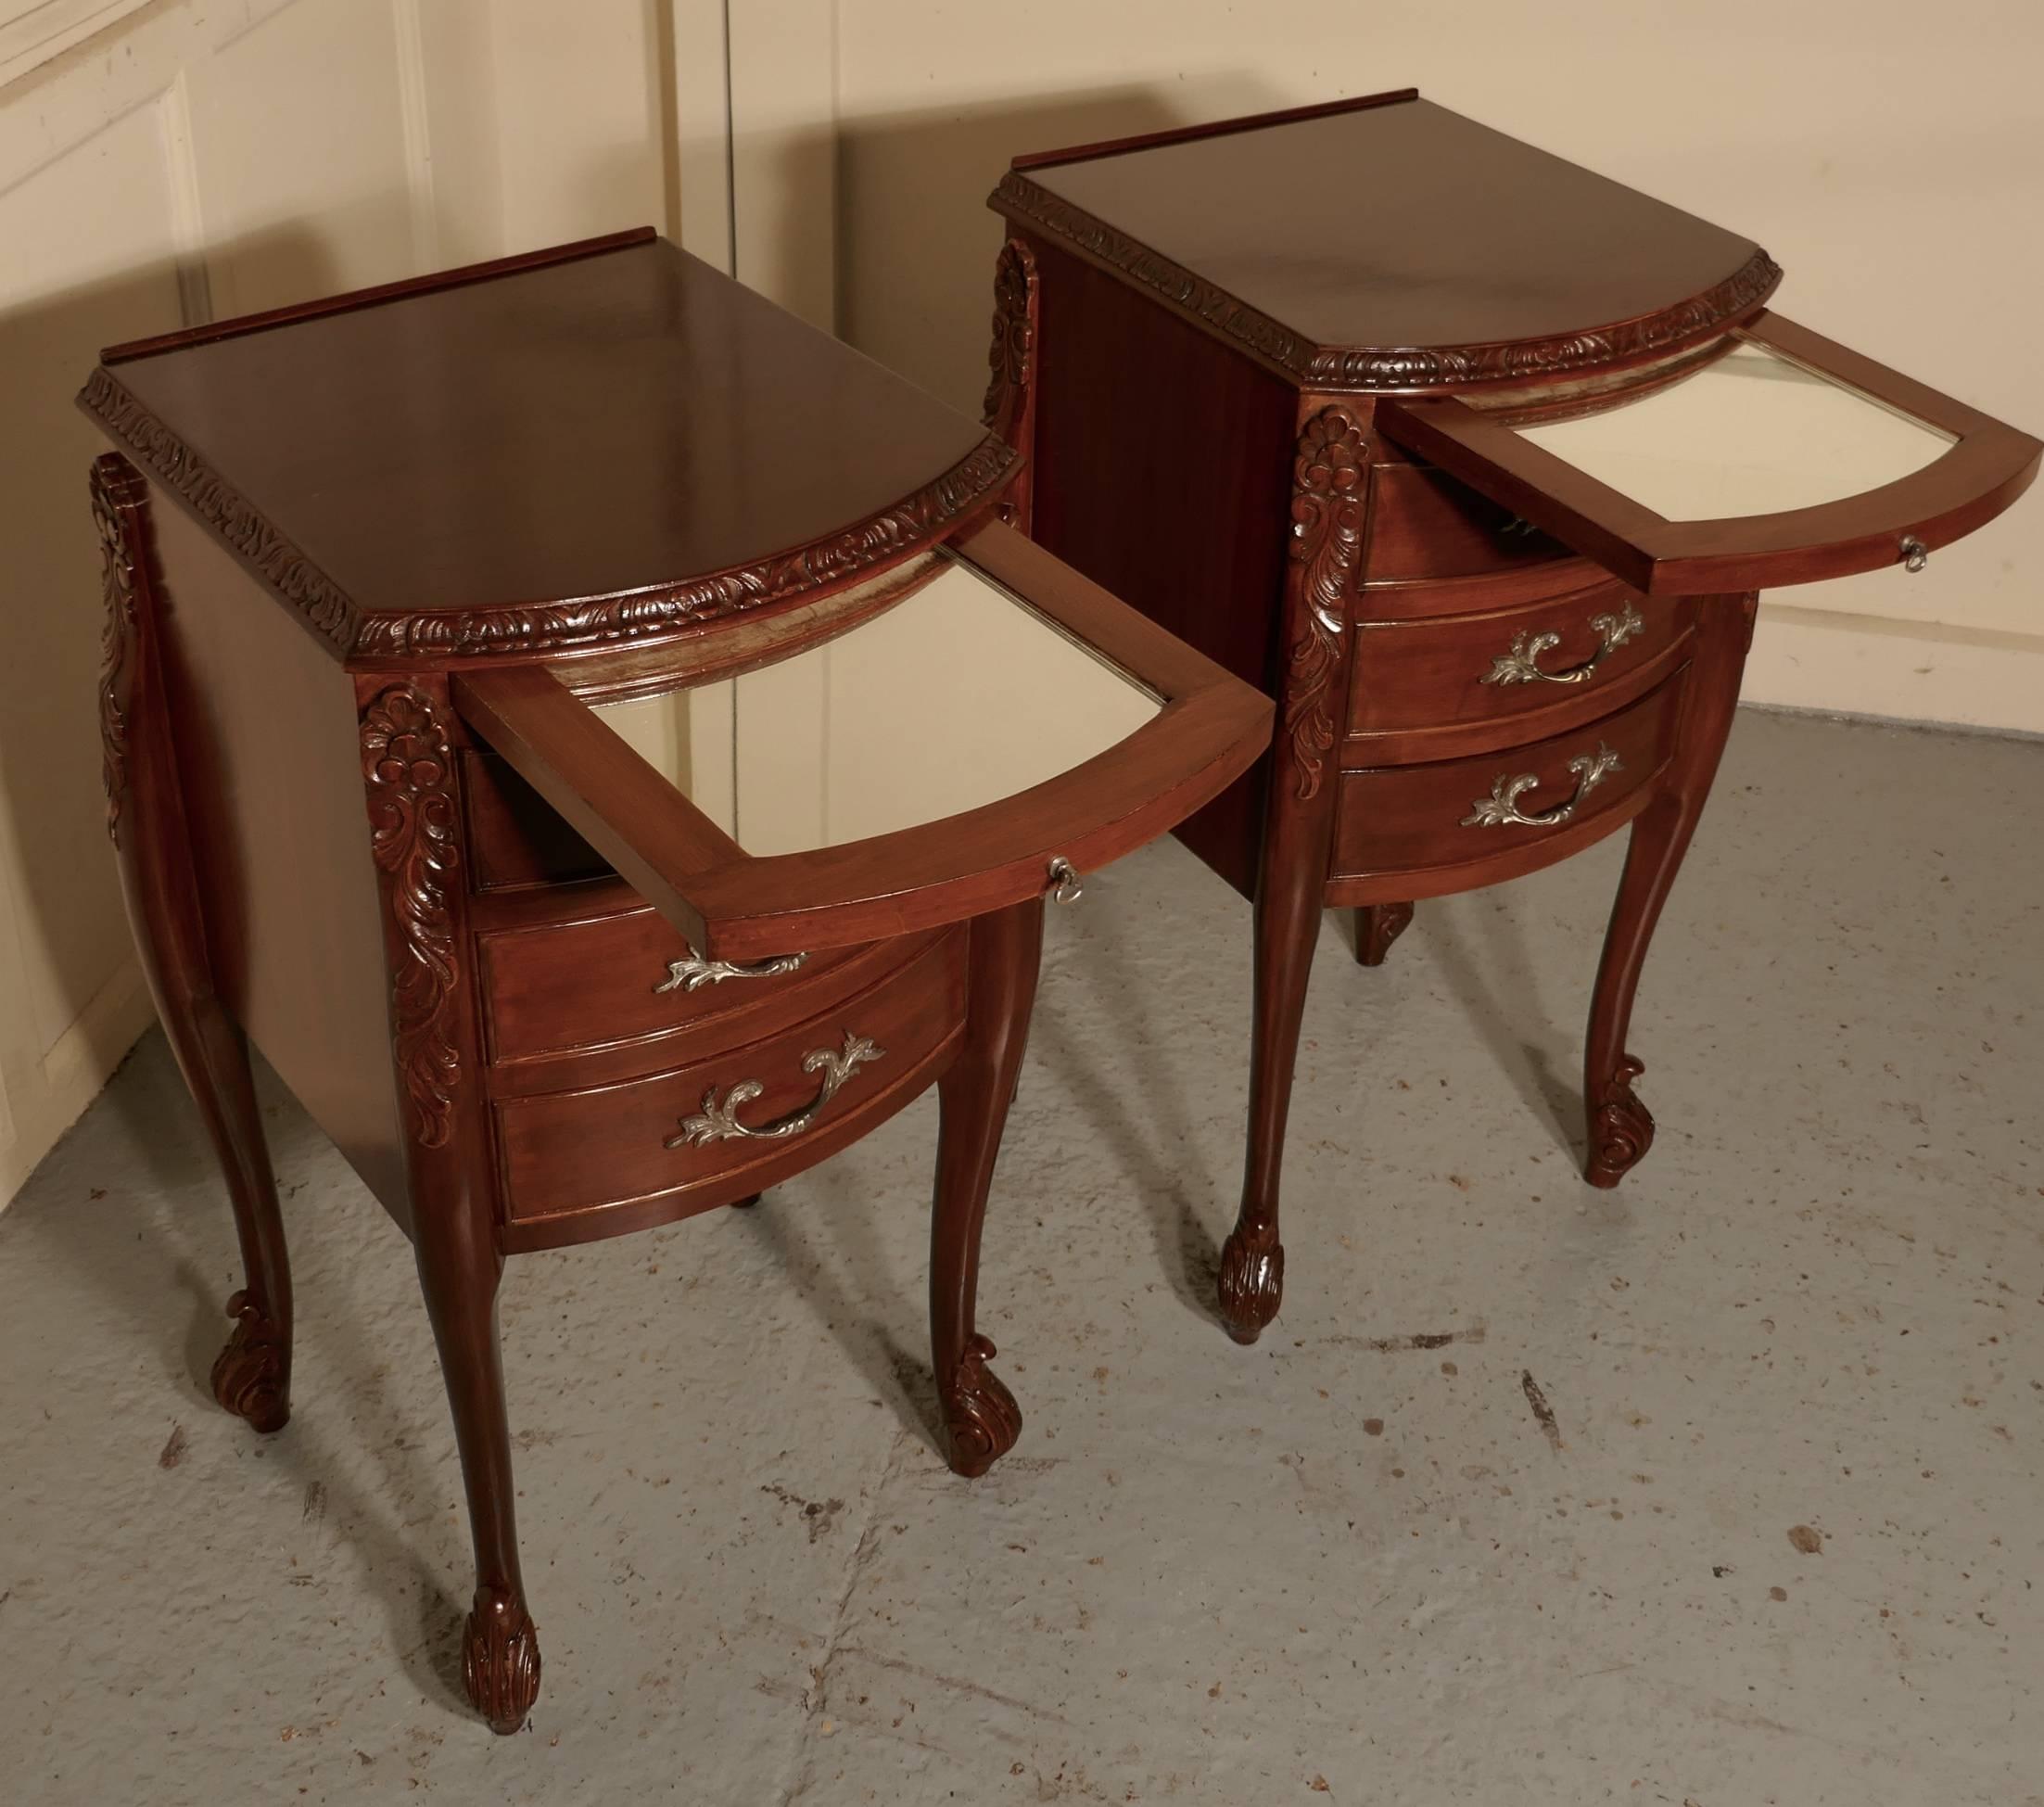 Pair of French walnut and ormolu three-drawer bedside cabinets 

This is a pretty pair of cabinets or chevet they are made in walnut and have a carved decoration around the top, bow shaped fronts and they have decorative ormolu handles, each